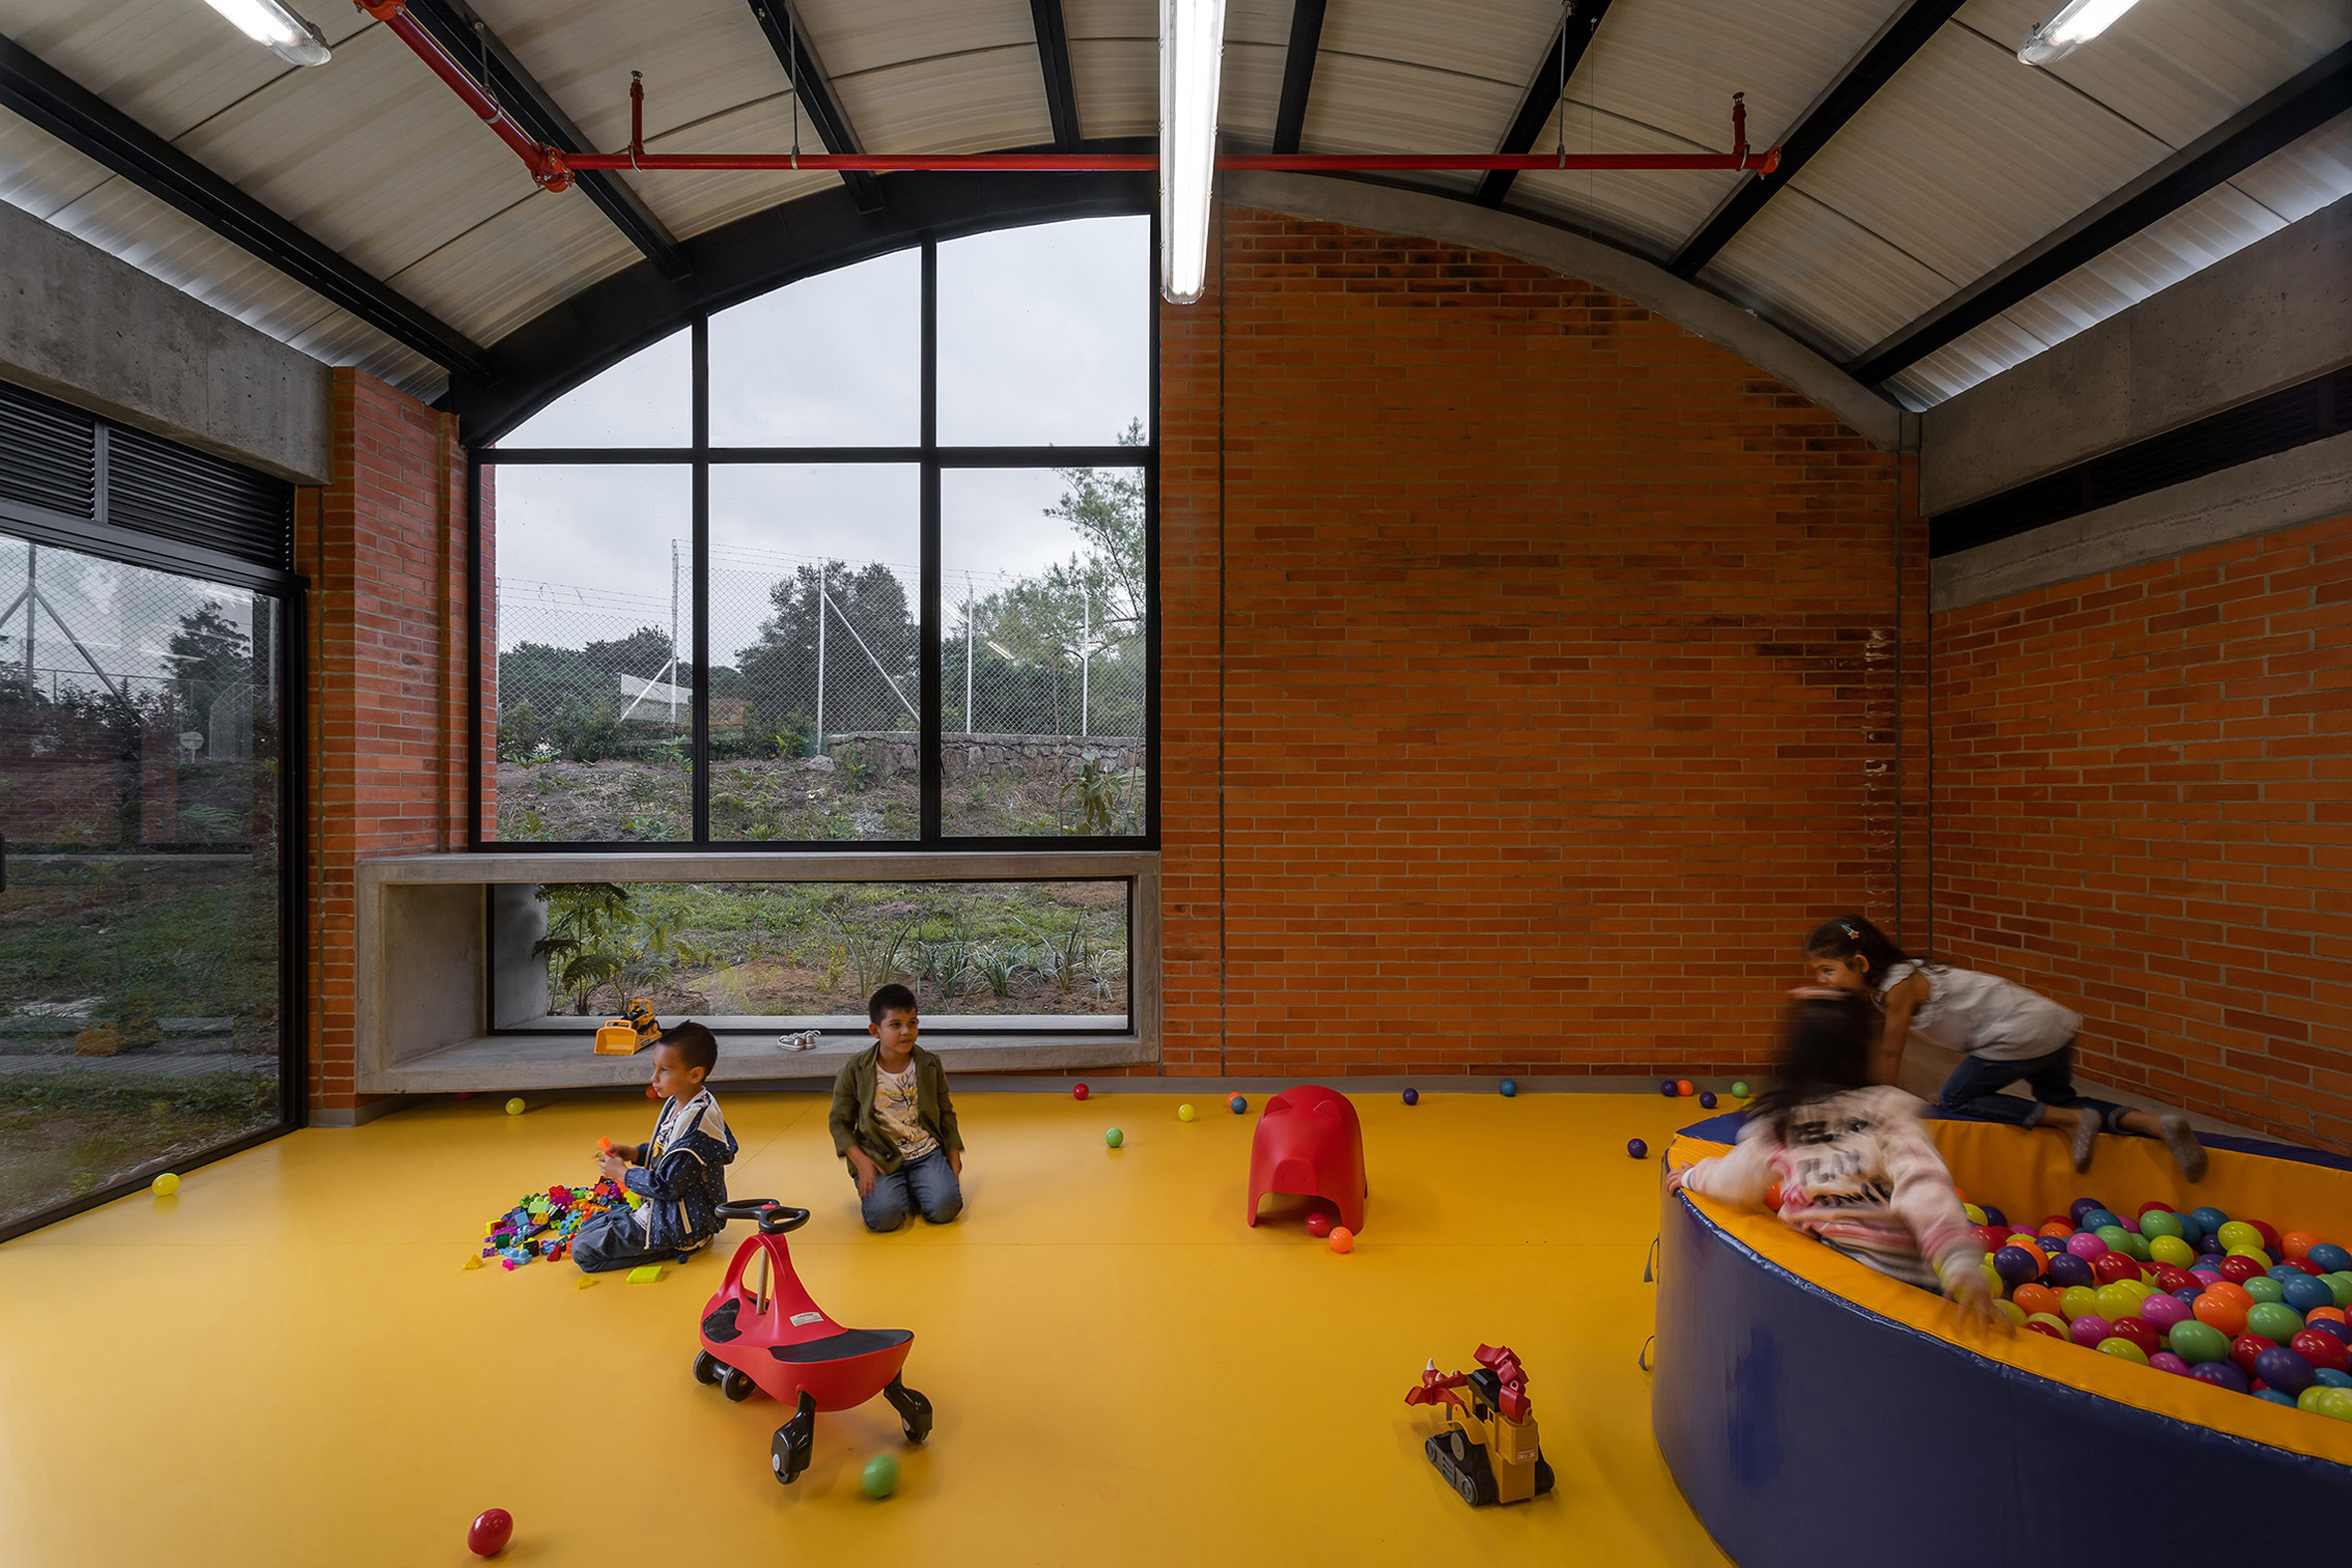 The children's centre is by architecture firm Taller Sintesis